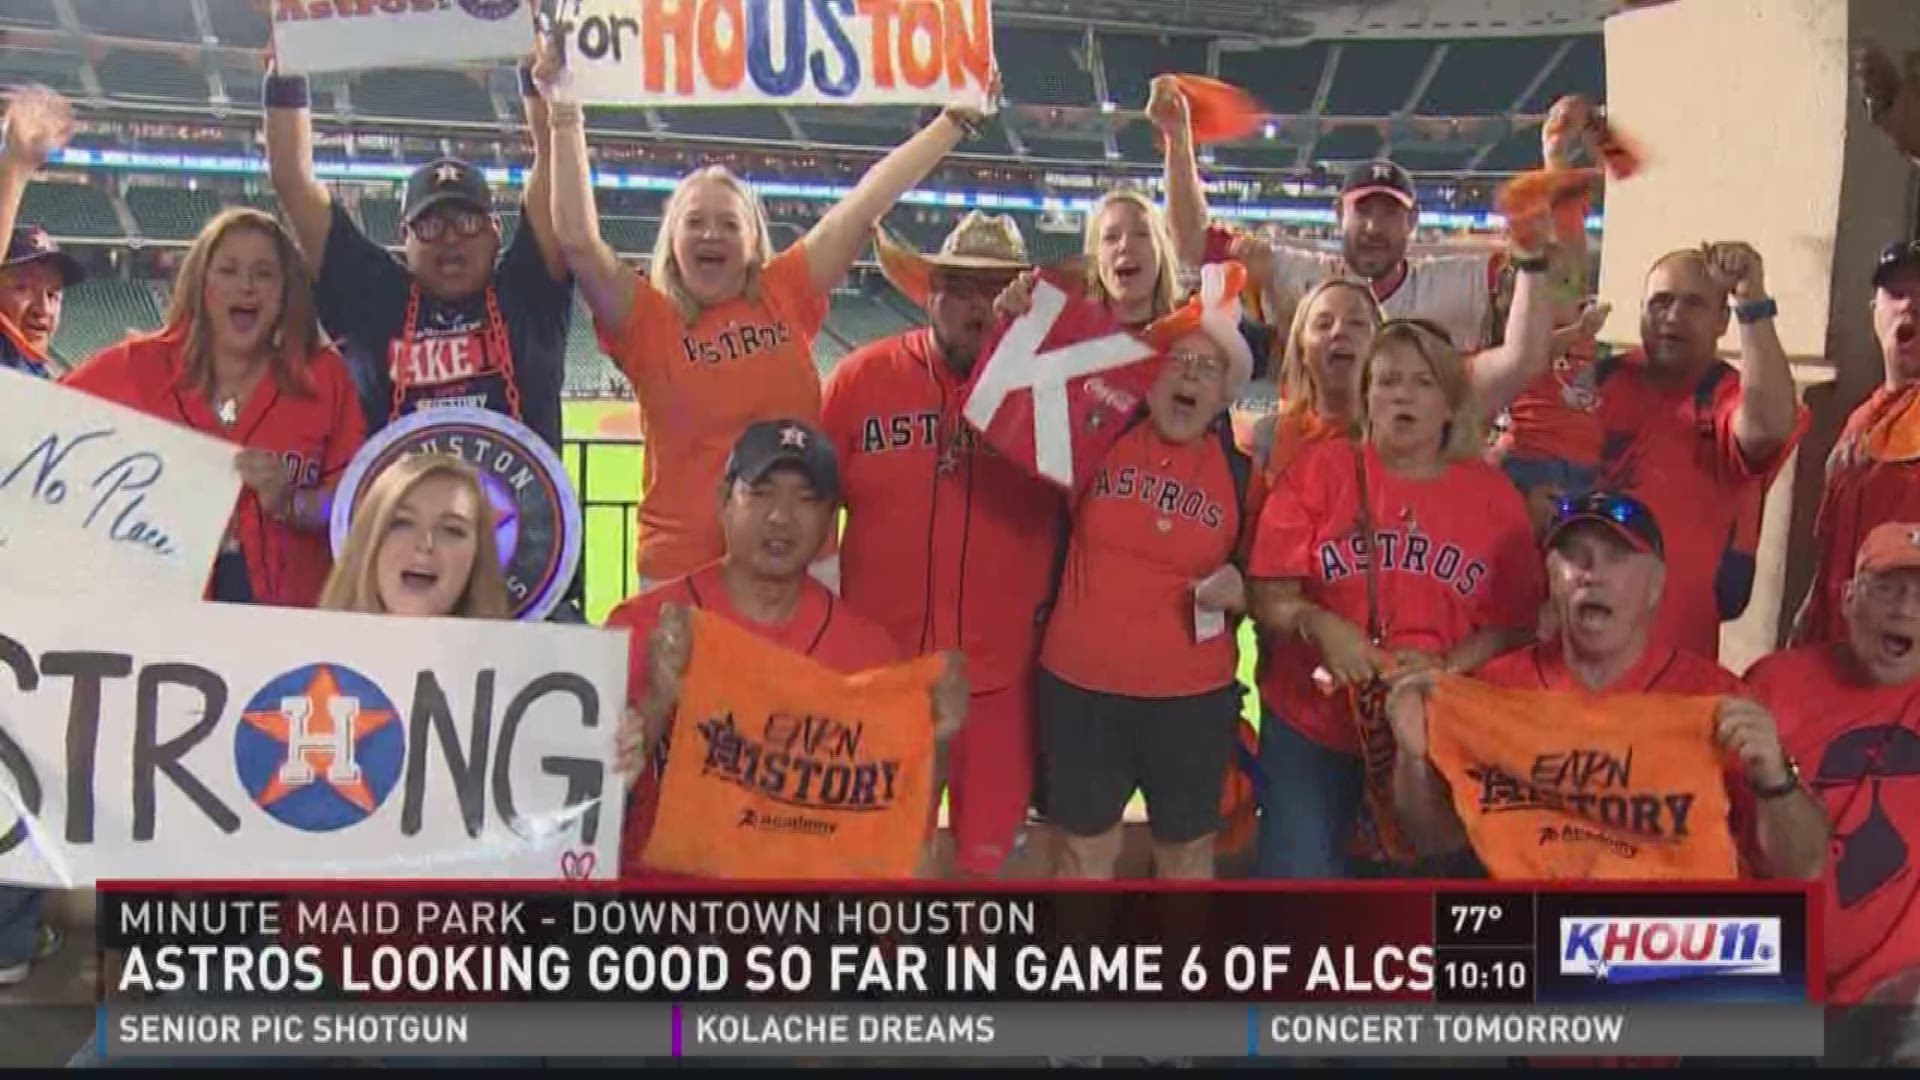 Houston Astros fans were enjoying Game 6 of the ALCS as the Astros looked to force a Game 7.